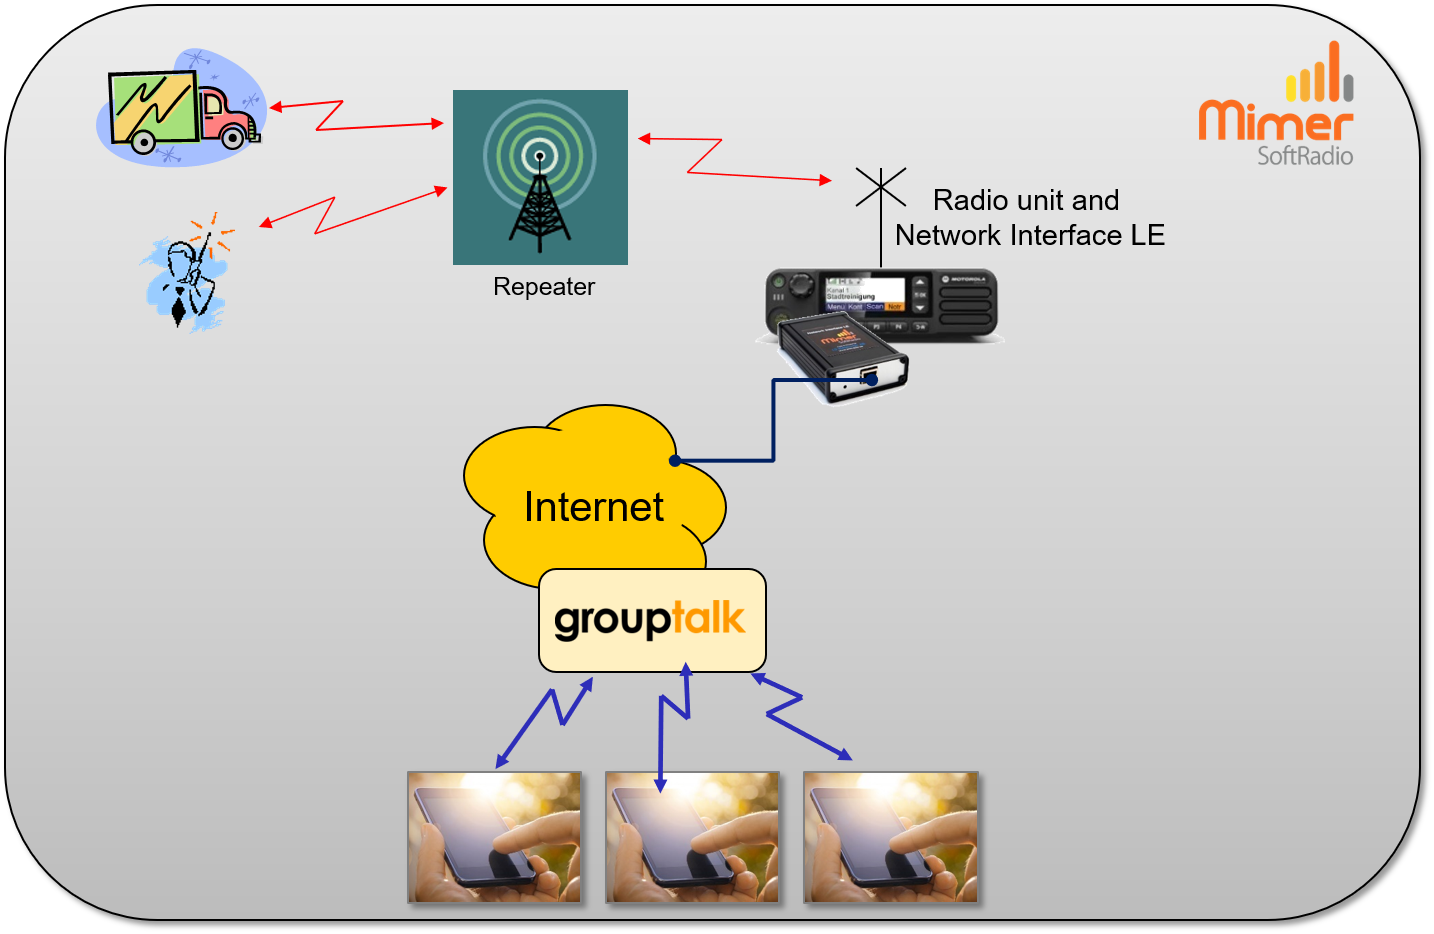 GroupTalk users connected to a radio system through a Mimer Network Interface LE.